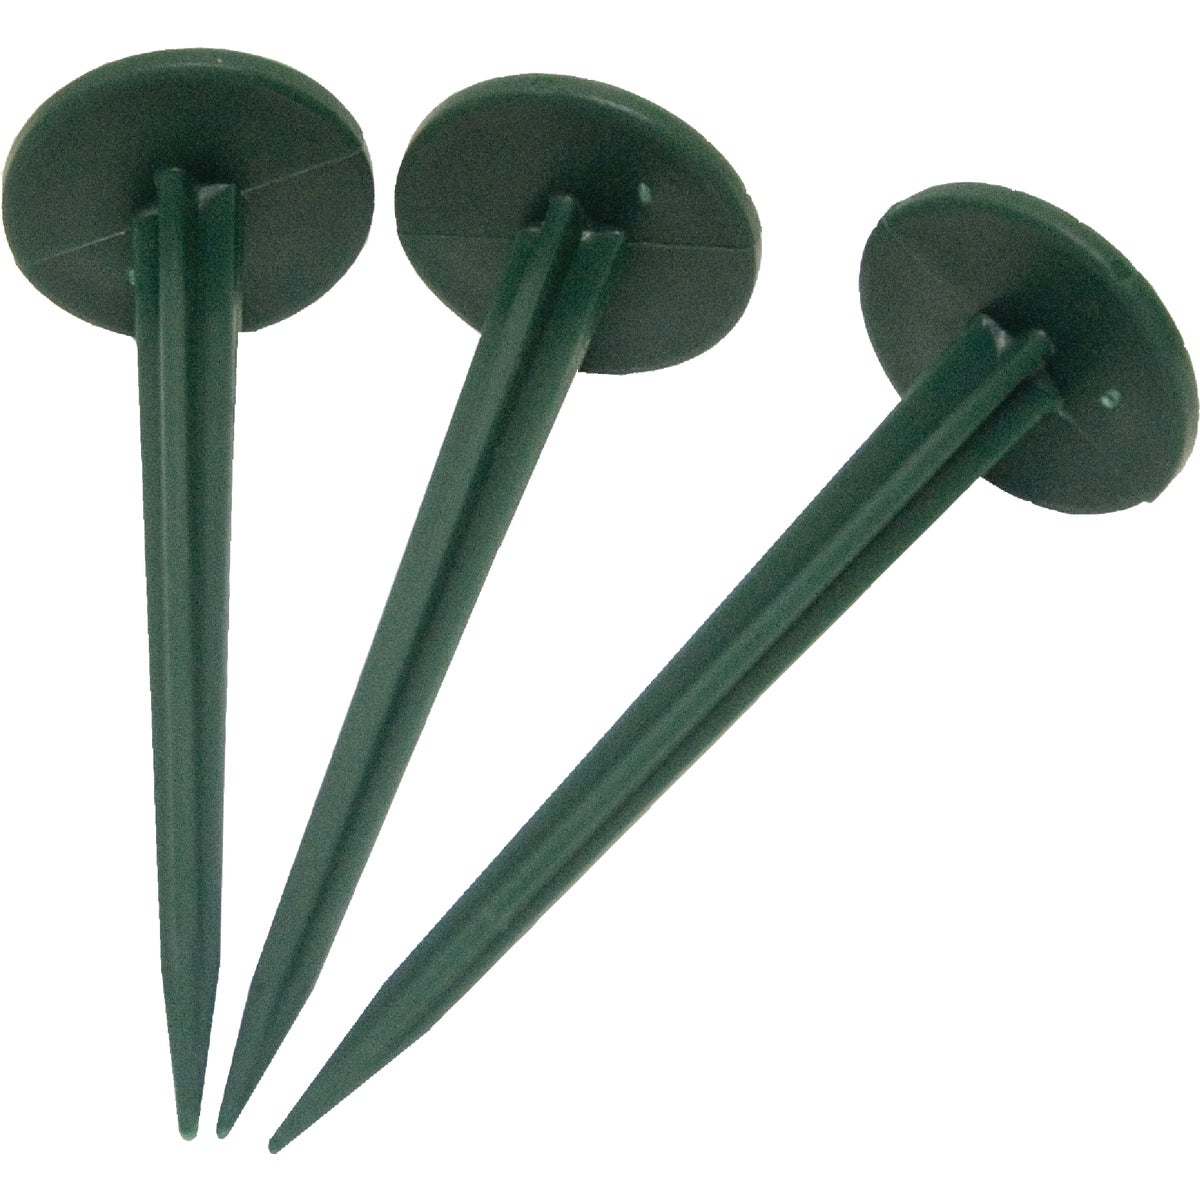 Item 733245, Fabric pins are ideal to hold landscape fabric, netting and grow-covers in 